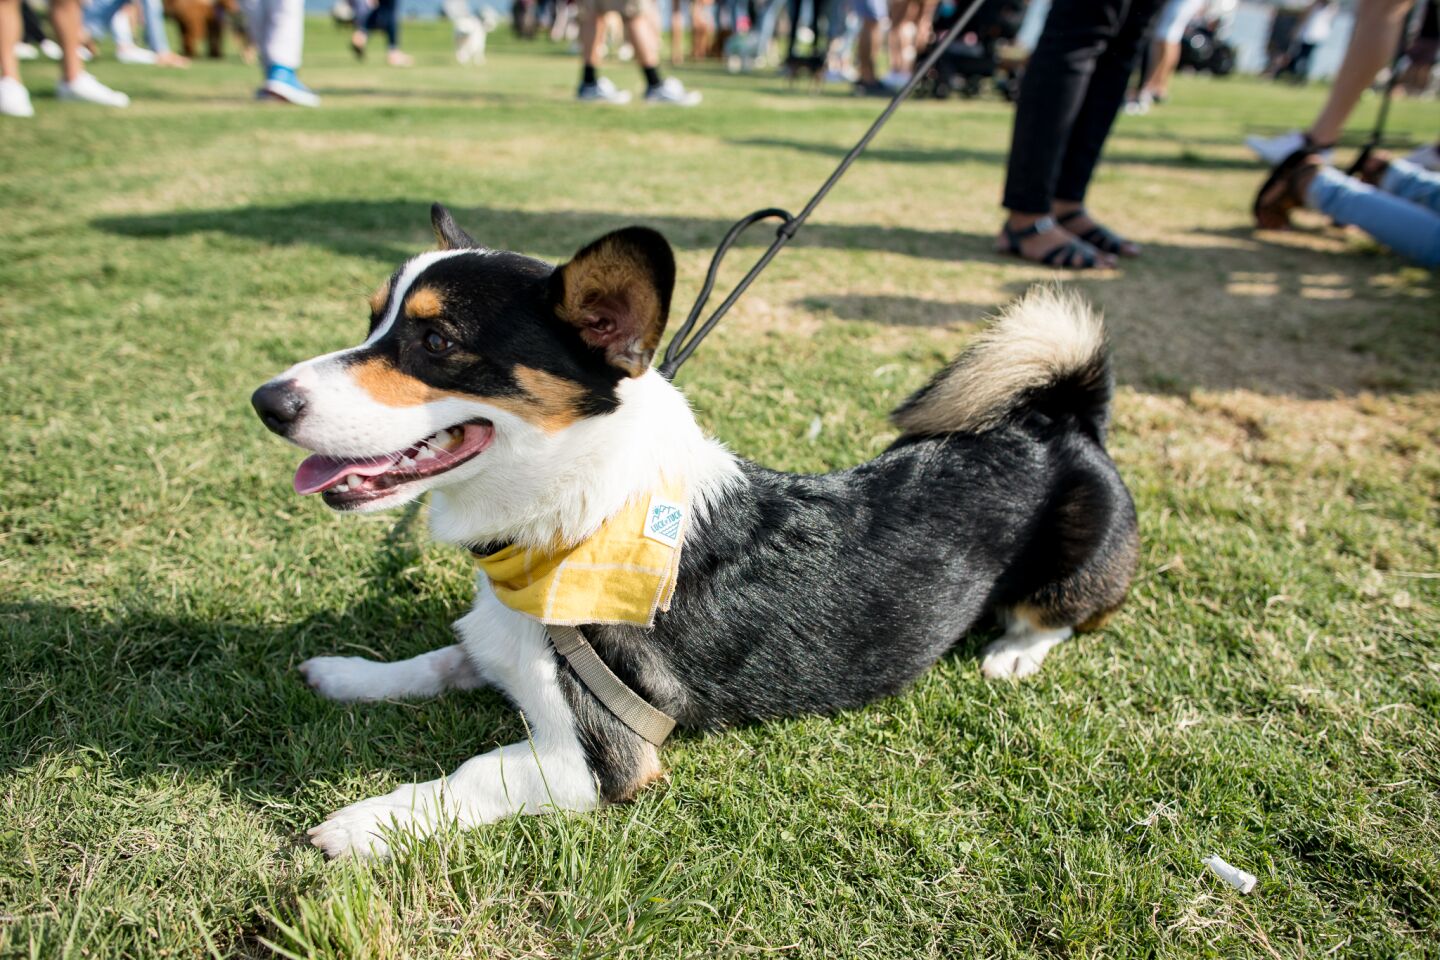 Four-legged friends were welcome at Barks & Brews at the Embarcadero Marina Park North on Saturday, Aug. 21, 2021.